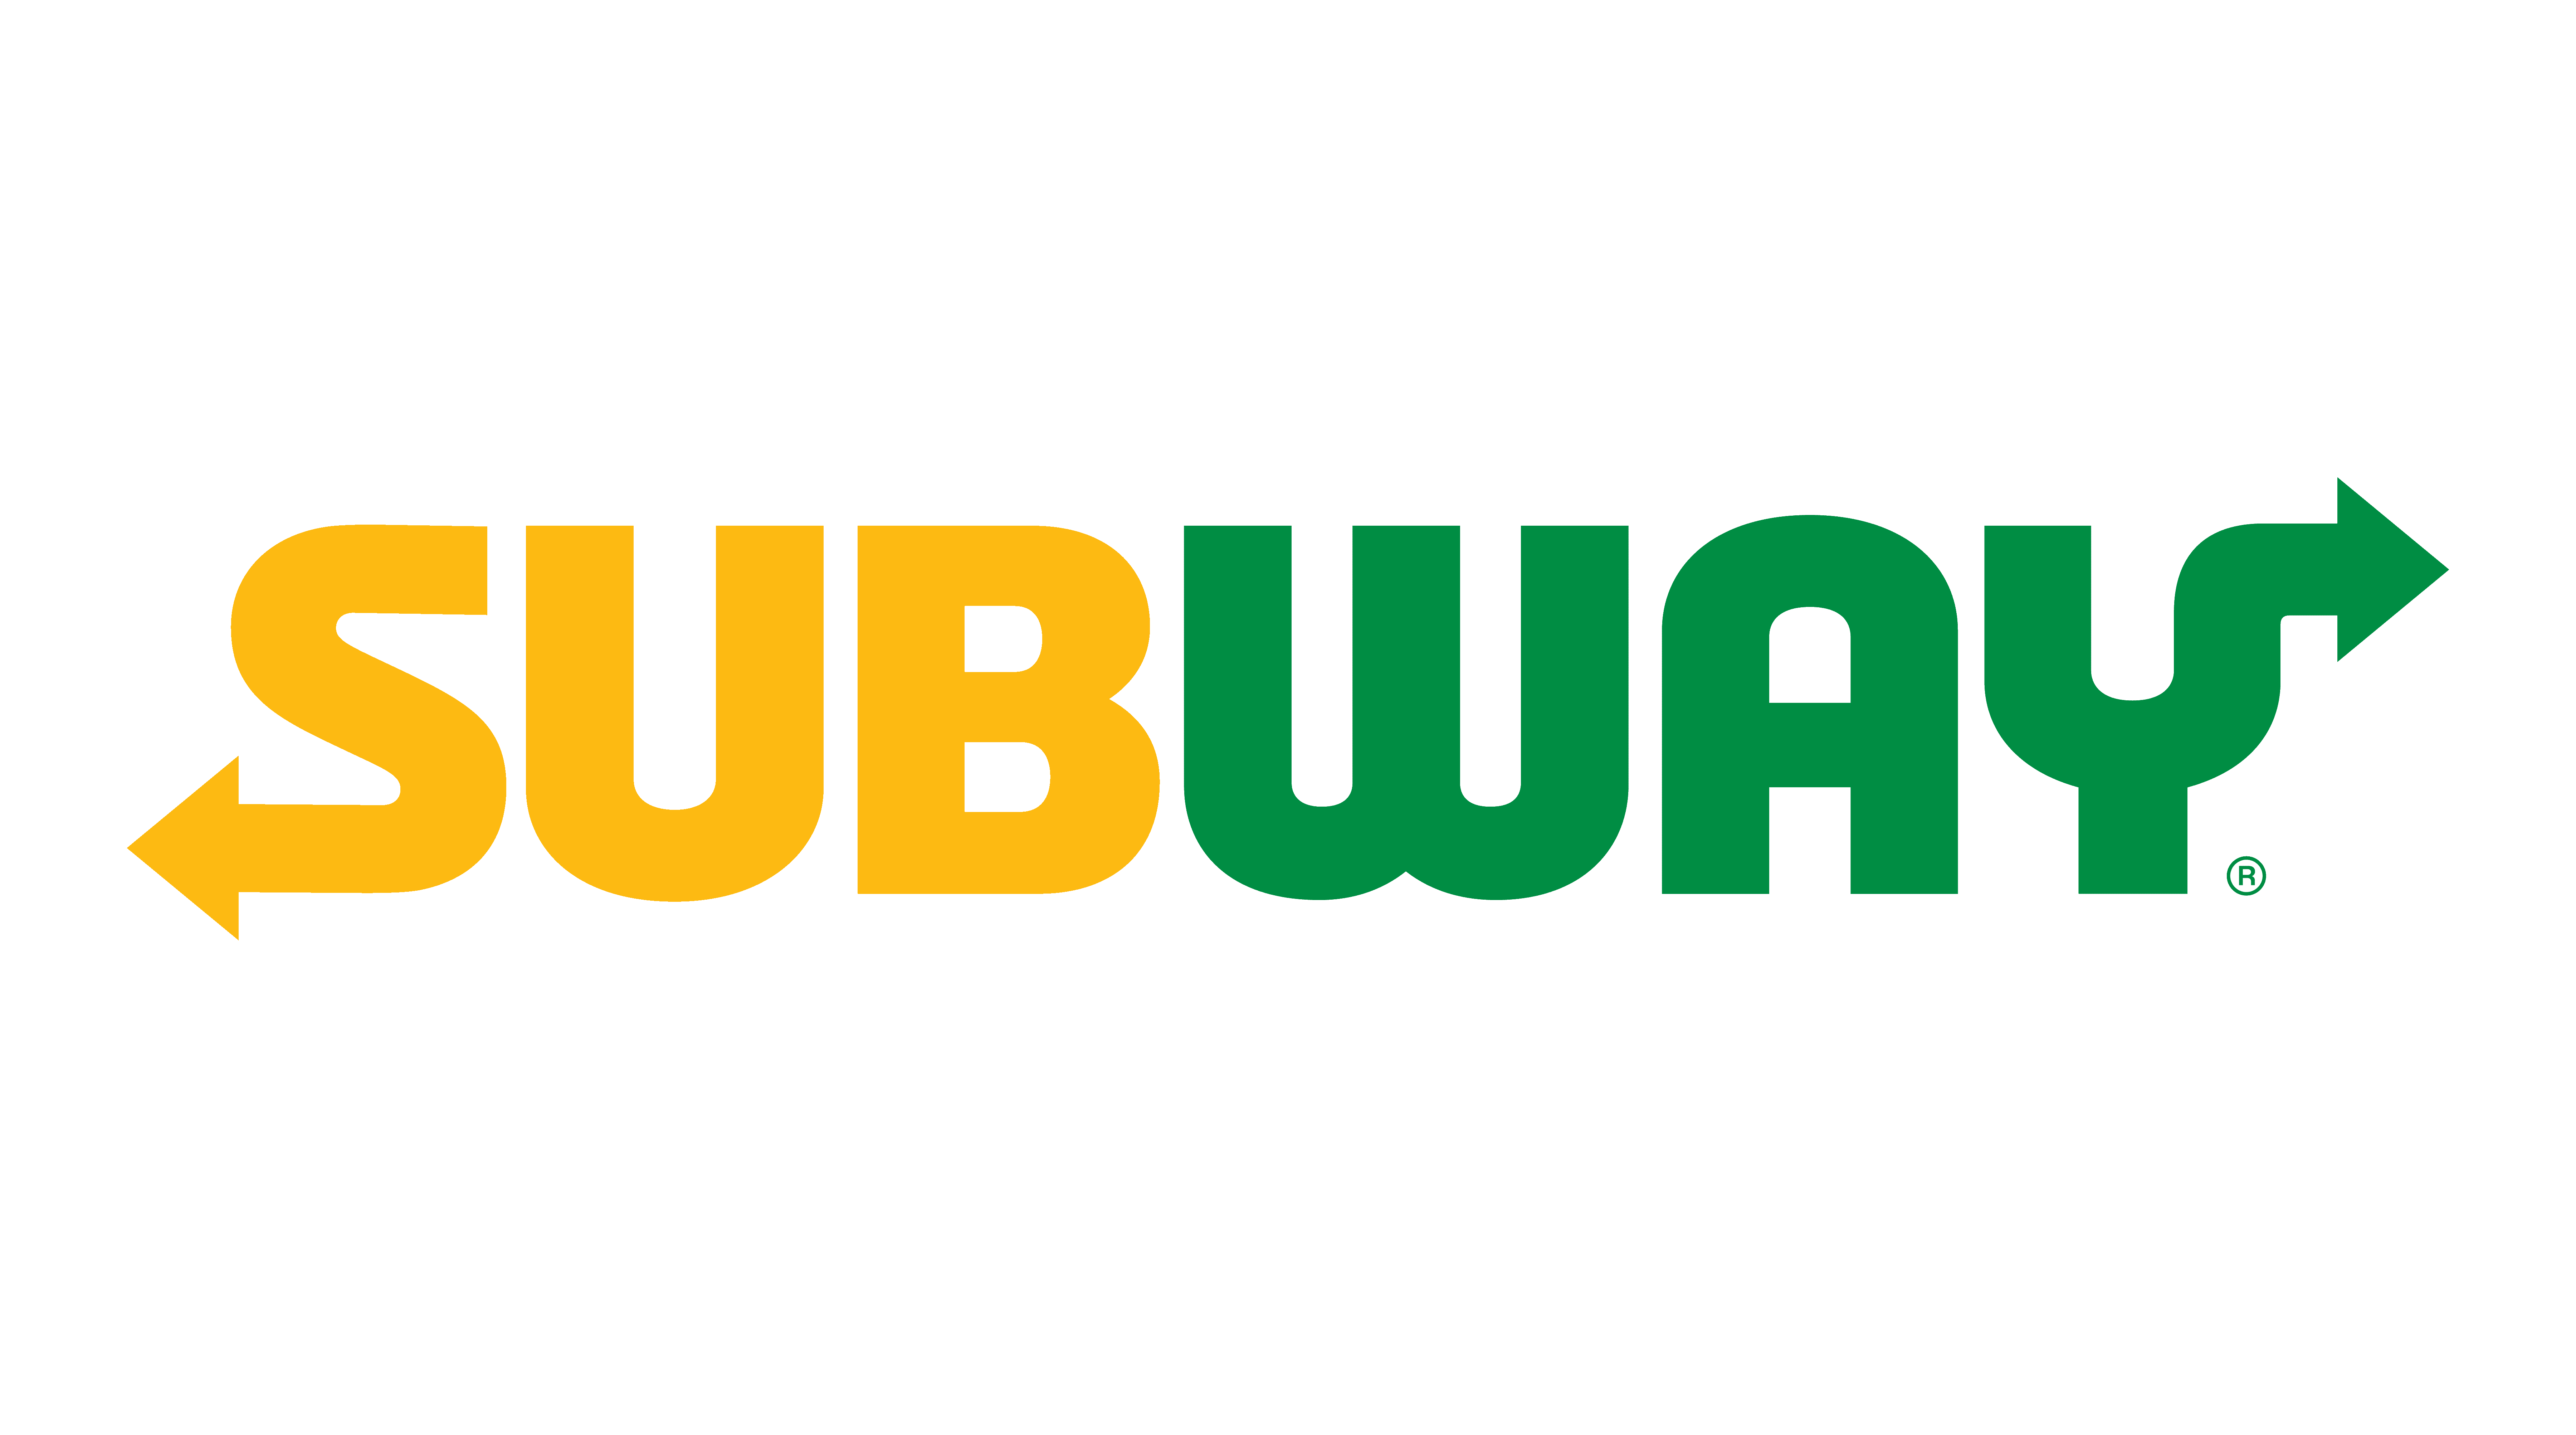 Subway IP LLC, doing business as Subway, is an American multinational fast food restaurant franchise that specializes in submarine sandwiches, wraps, salads and drinks. Subway was founded by Fred DeLuca and financed by Peter Buck in 1965 as Pete's Super Submarines in Bridgeport, Connecticut.